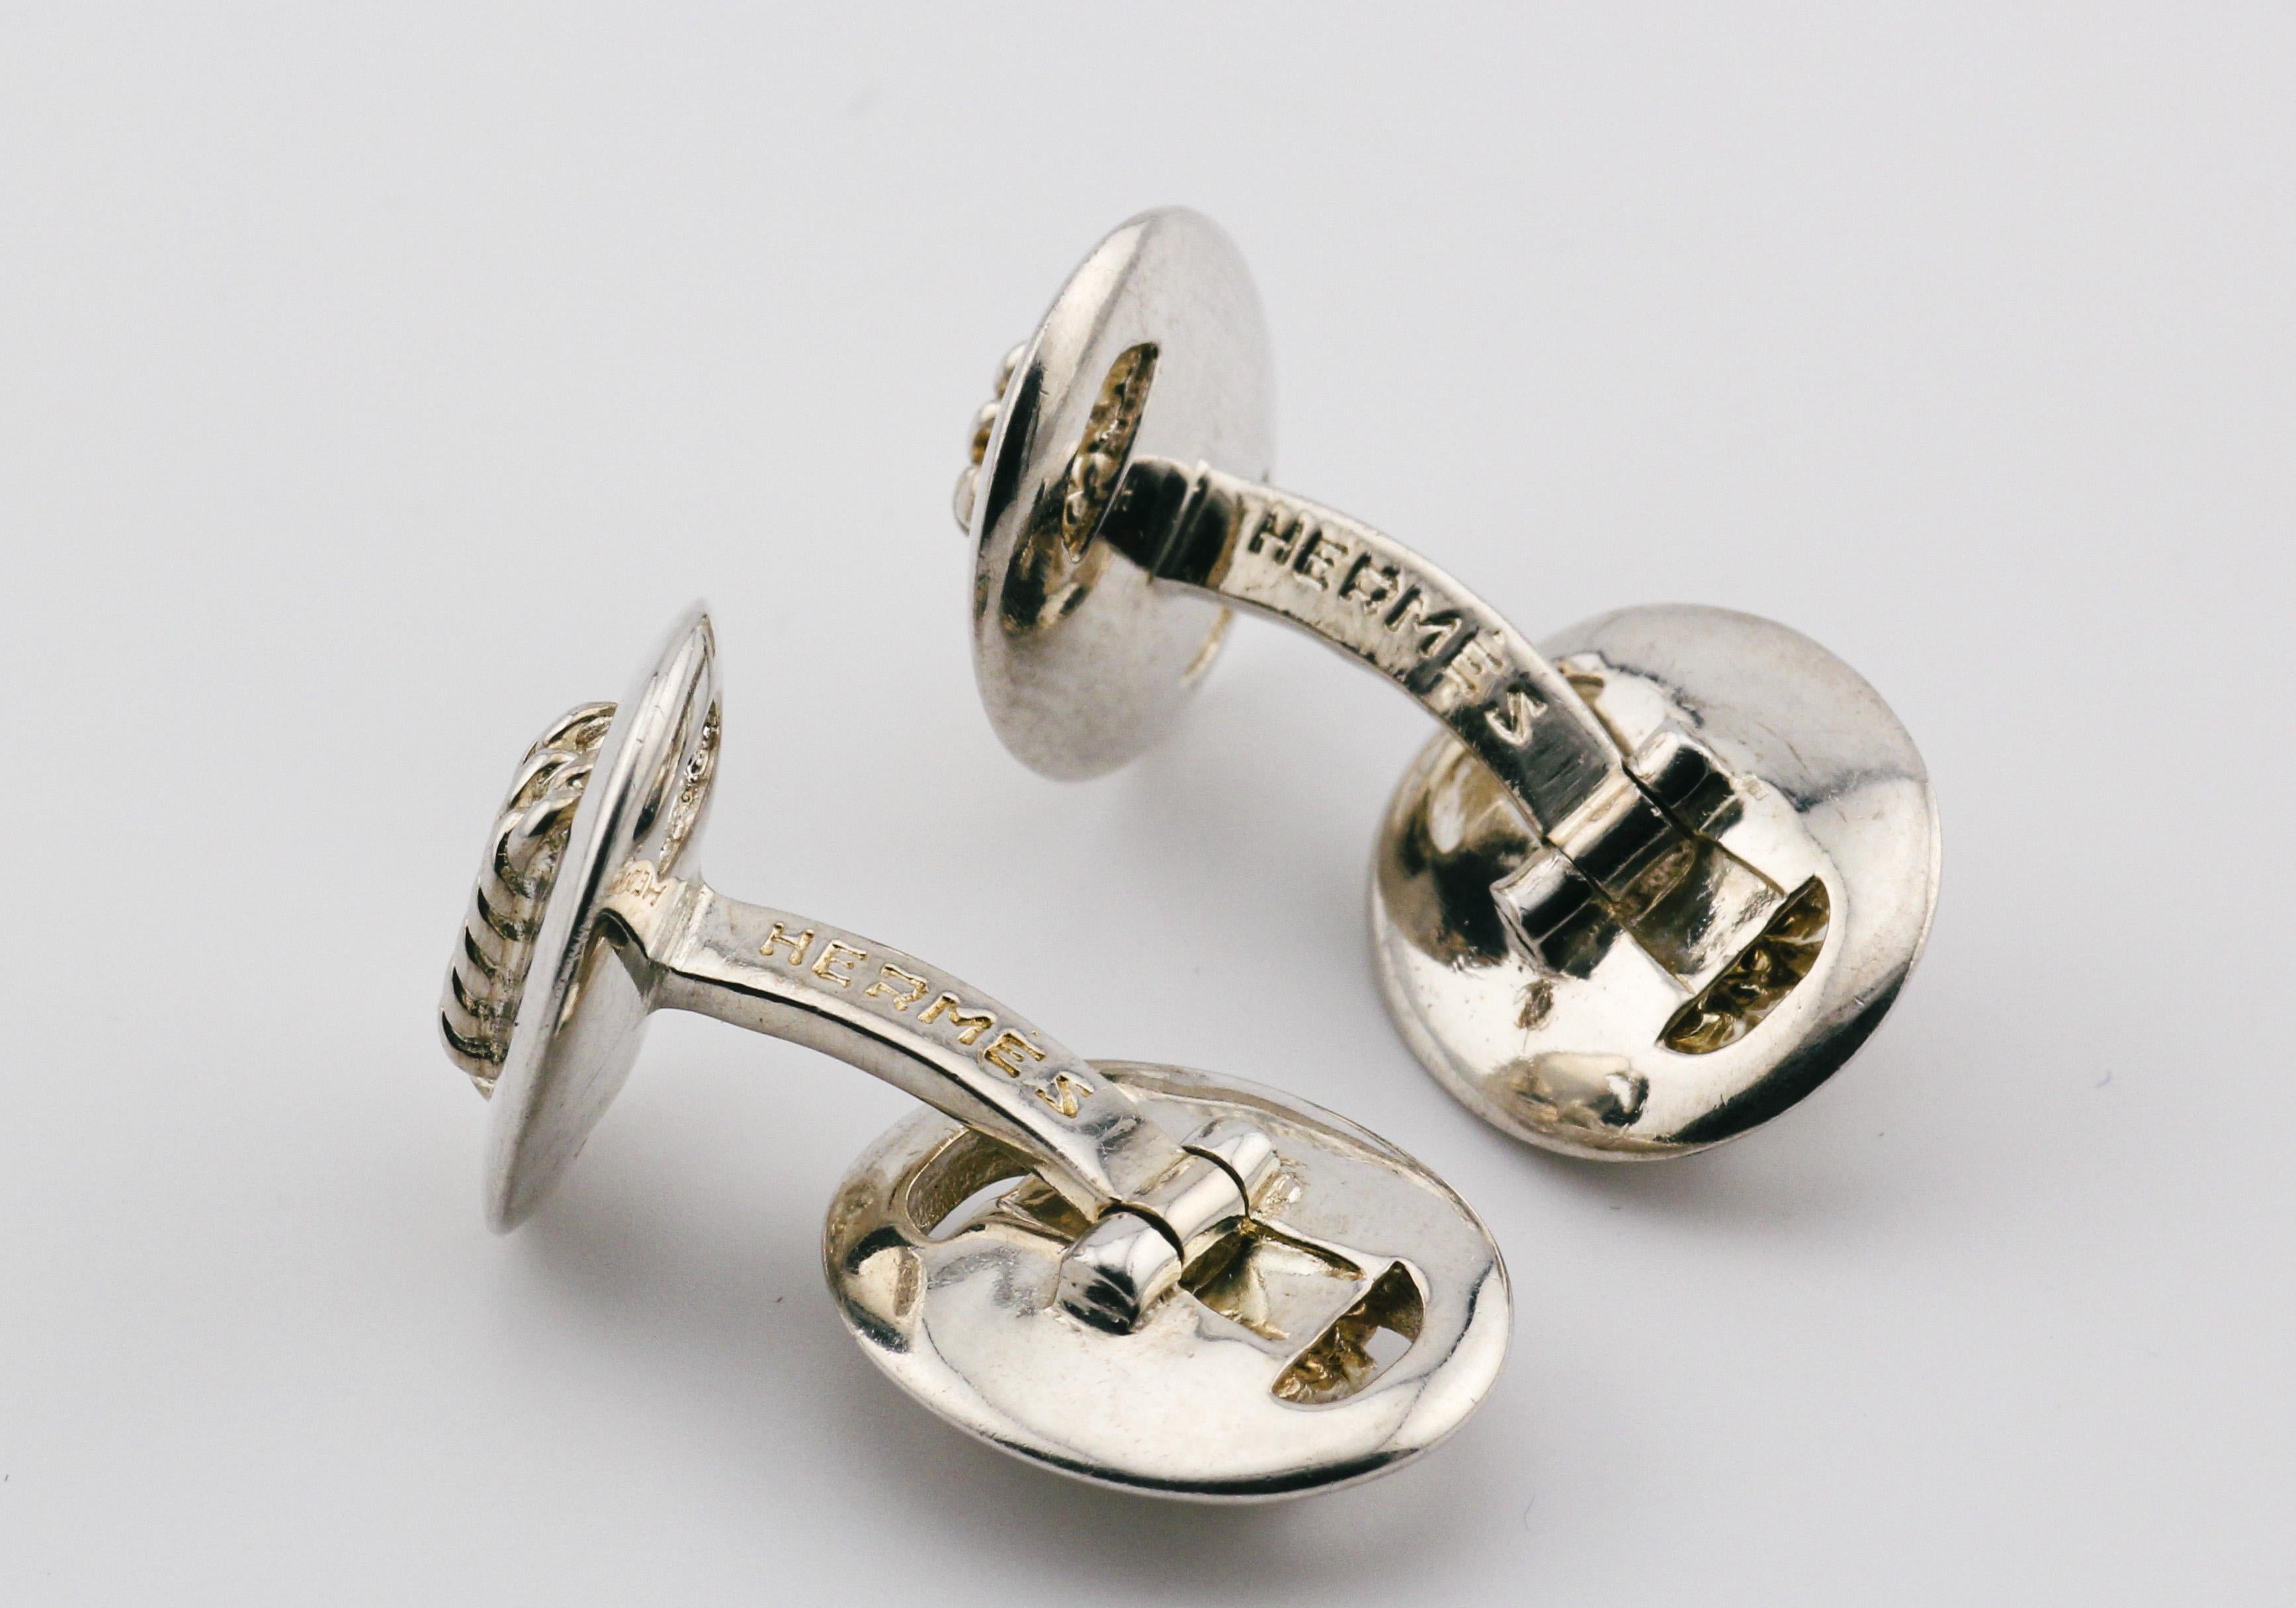 Hermes Vintage Sterling Silver Rope Motif Cufflinks In Good Condition For Sale In Bellmore, NY